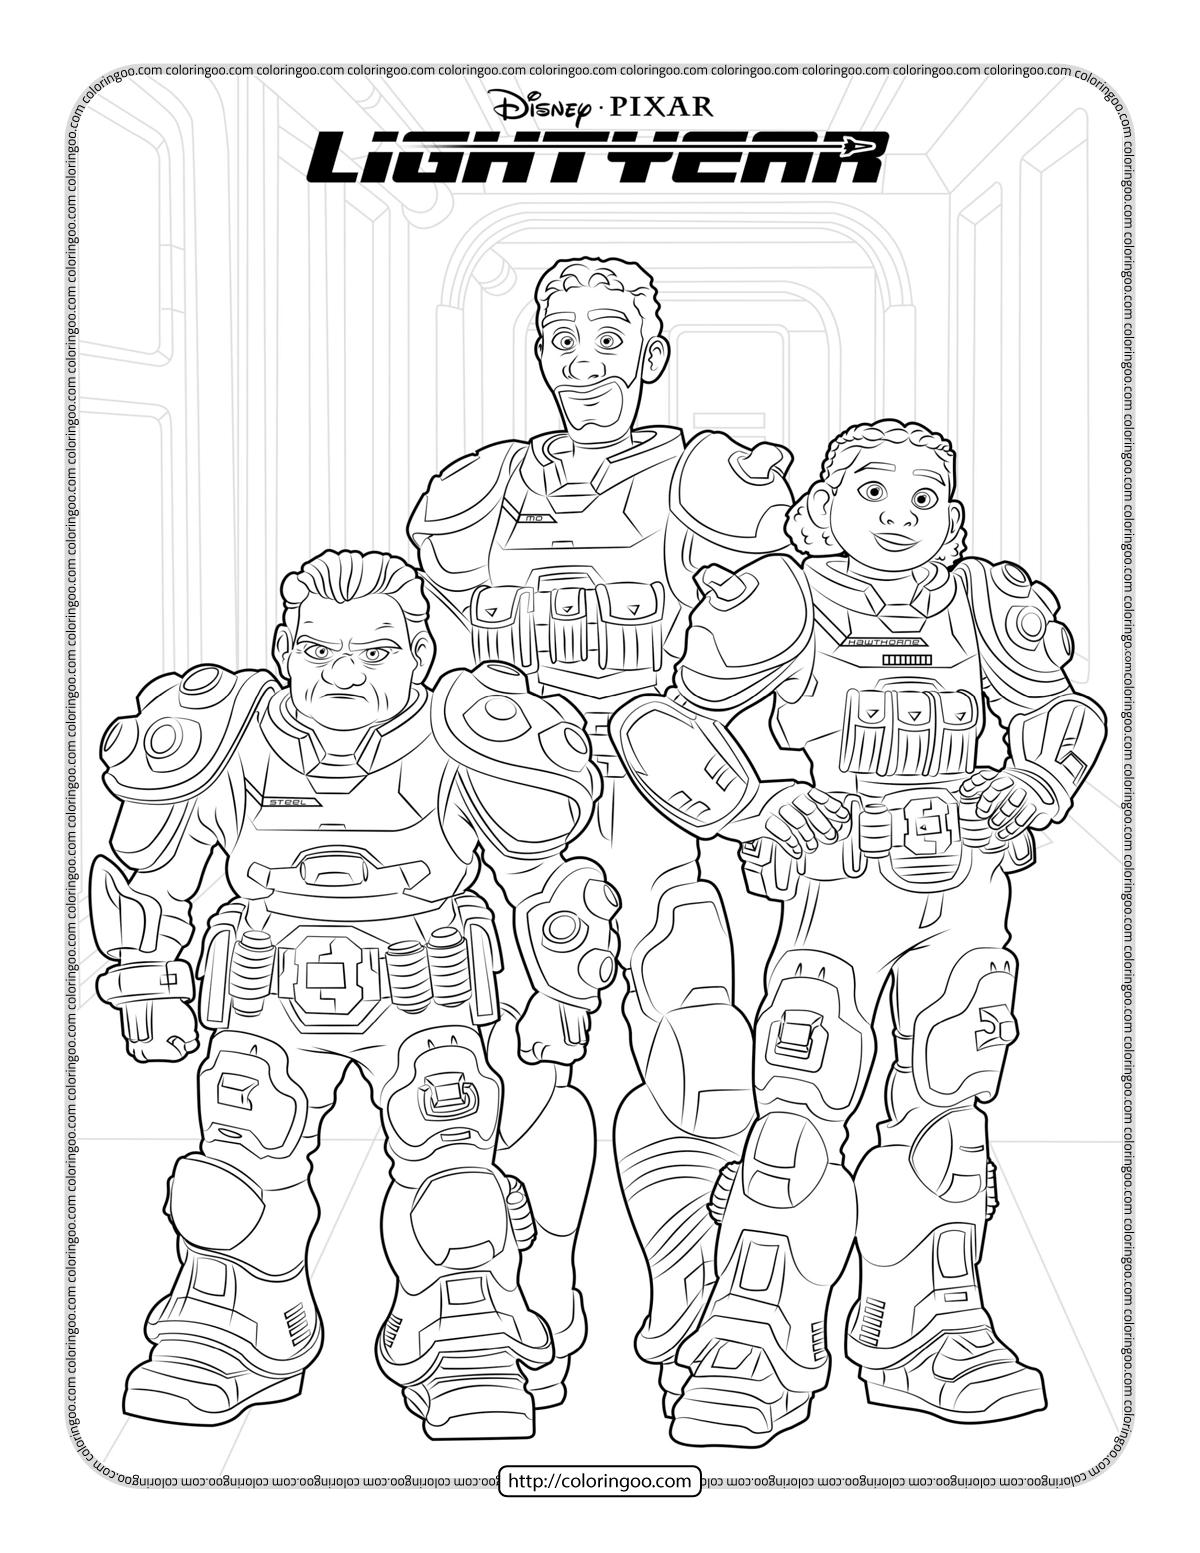 lightyear alisha izzy and maurice coloring pages